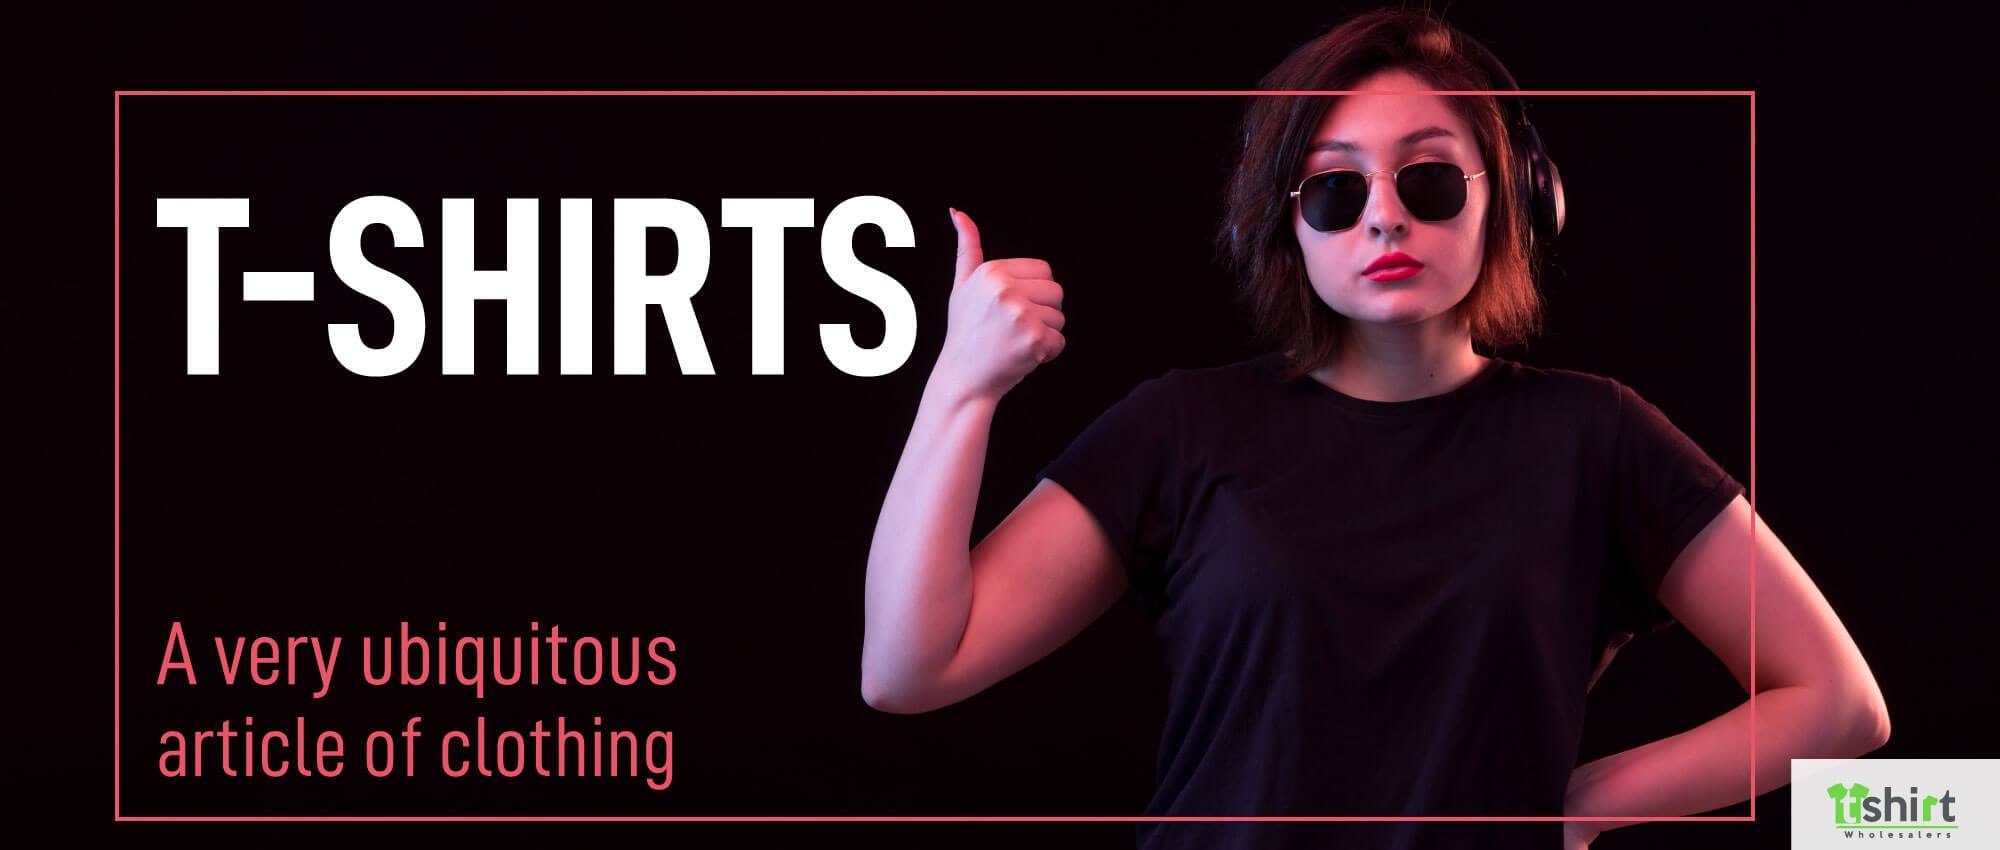 T-SHIRTS – A VERY UBIQUITOUS ARTICLE OF CLOTHING